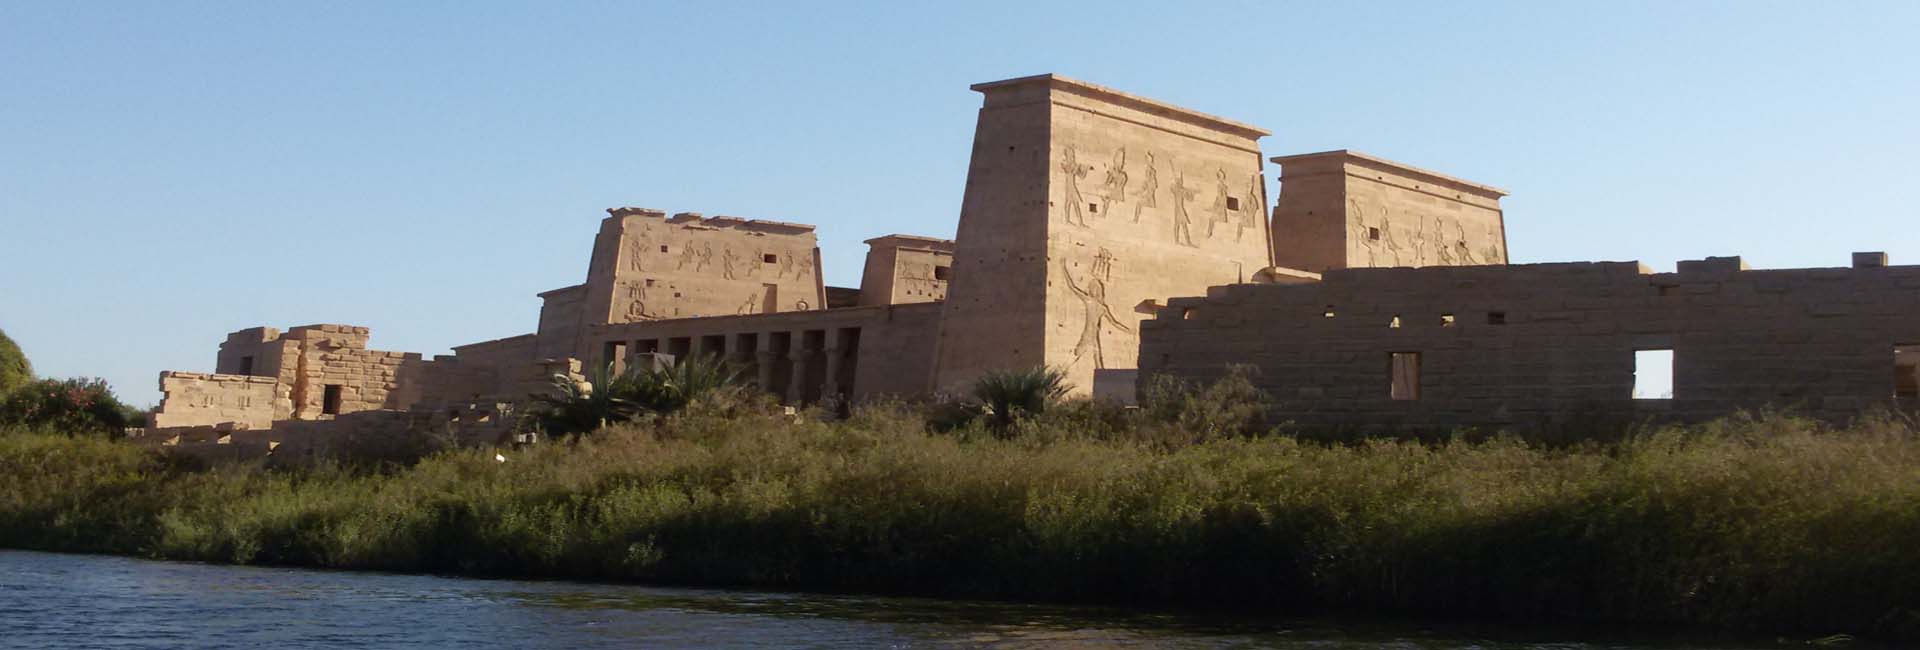 Aswan and Luxor tour package